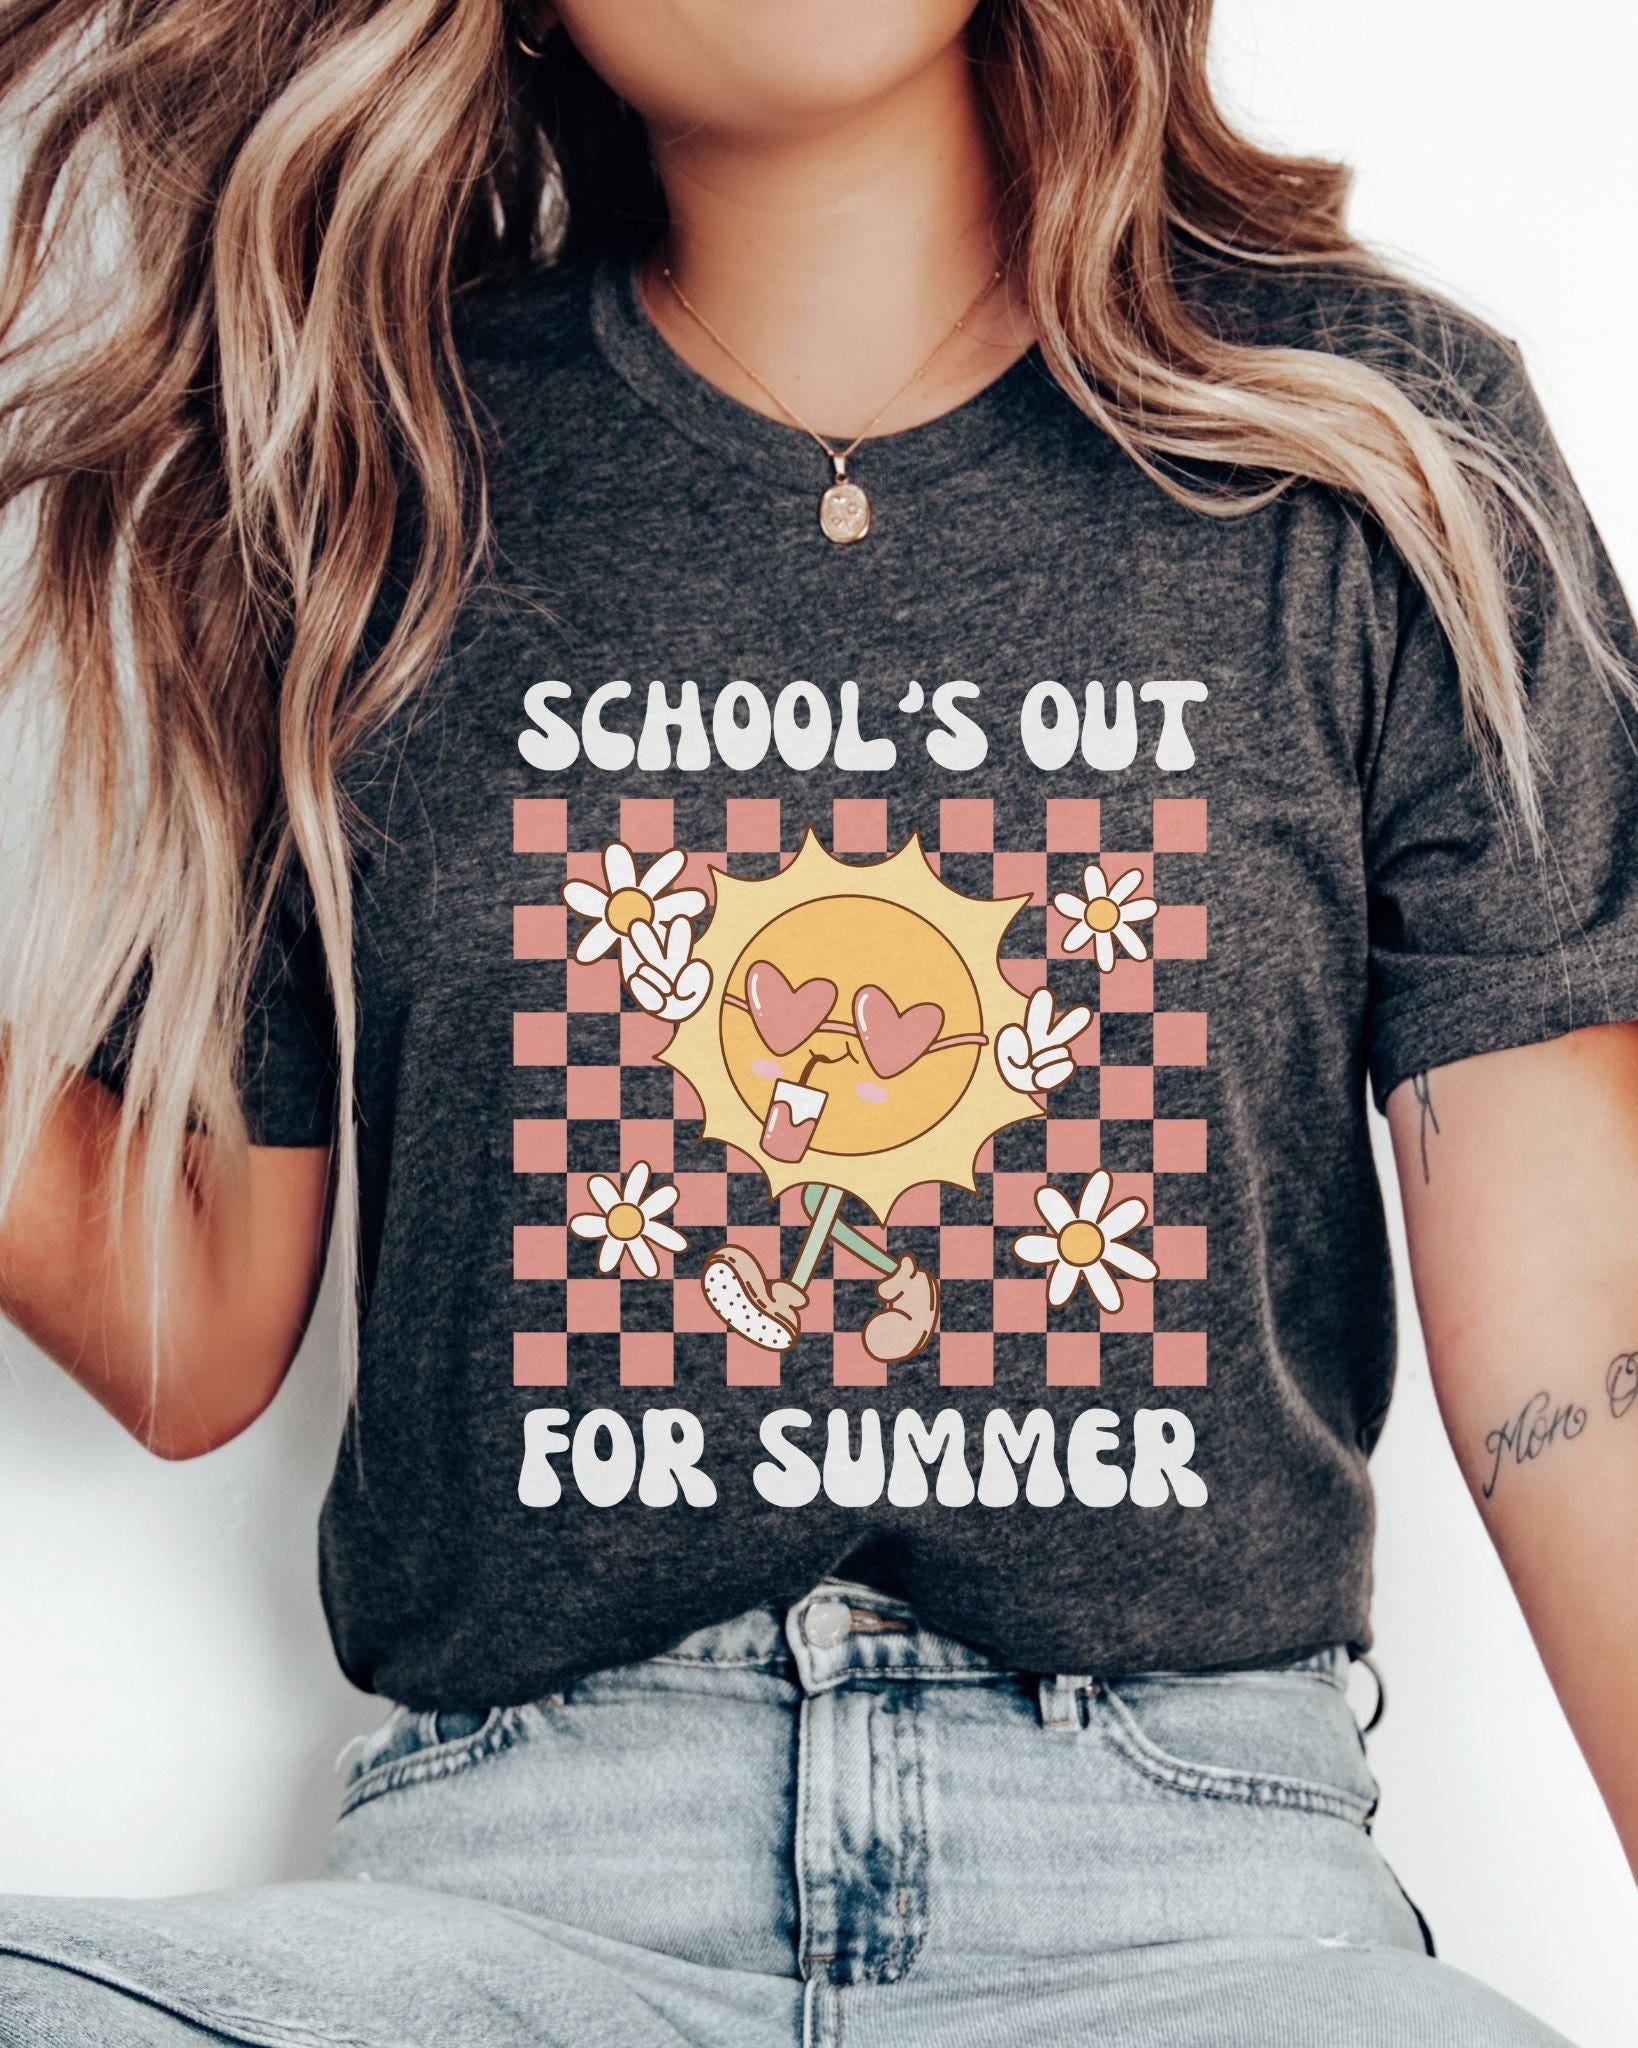 Retro Schools Out For Summer Shirt, Last Day of School Shirt, Teacher Summer Tshirt, End of School Year Shirt, End Of School Shirt